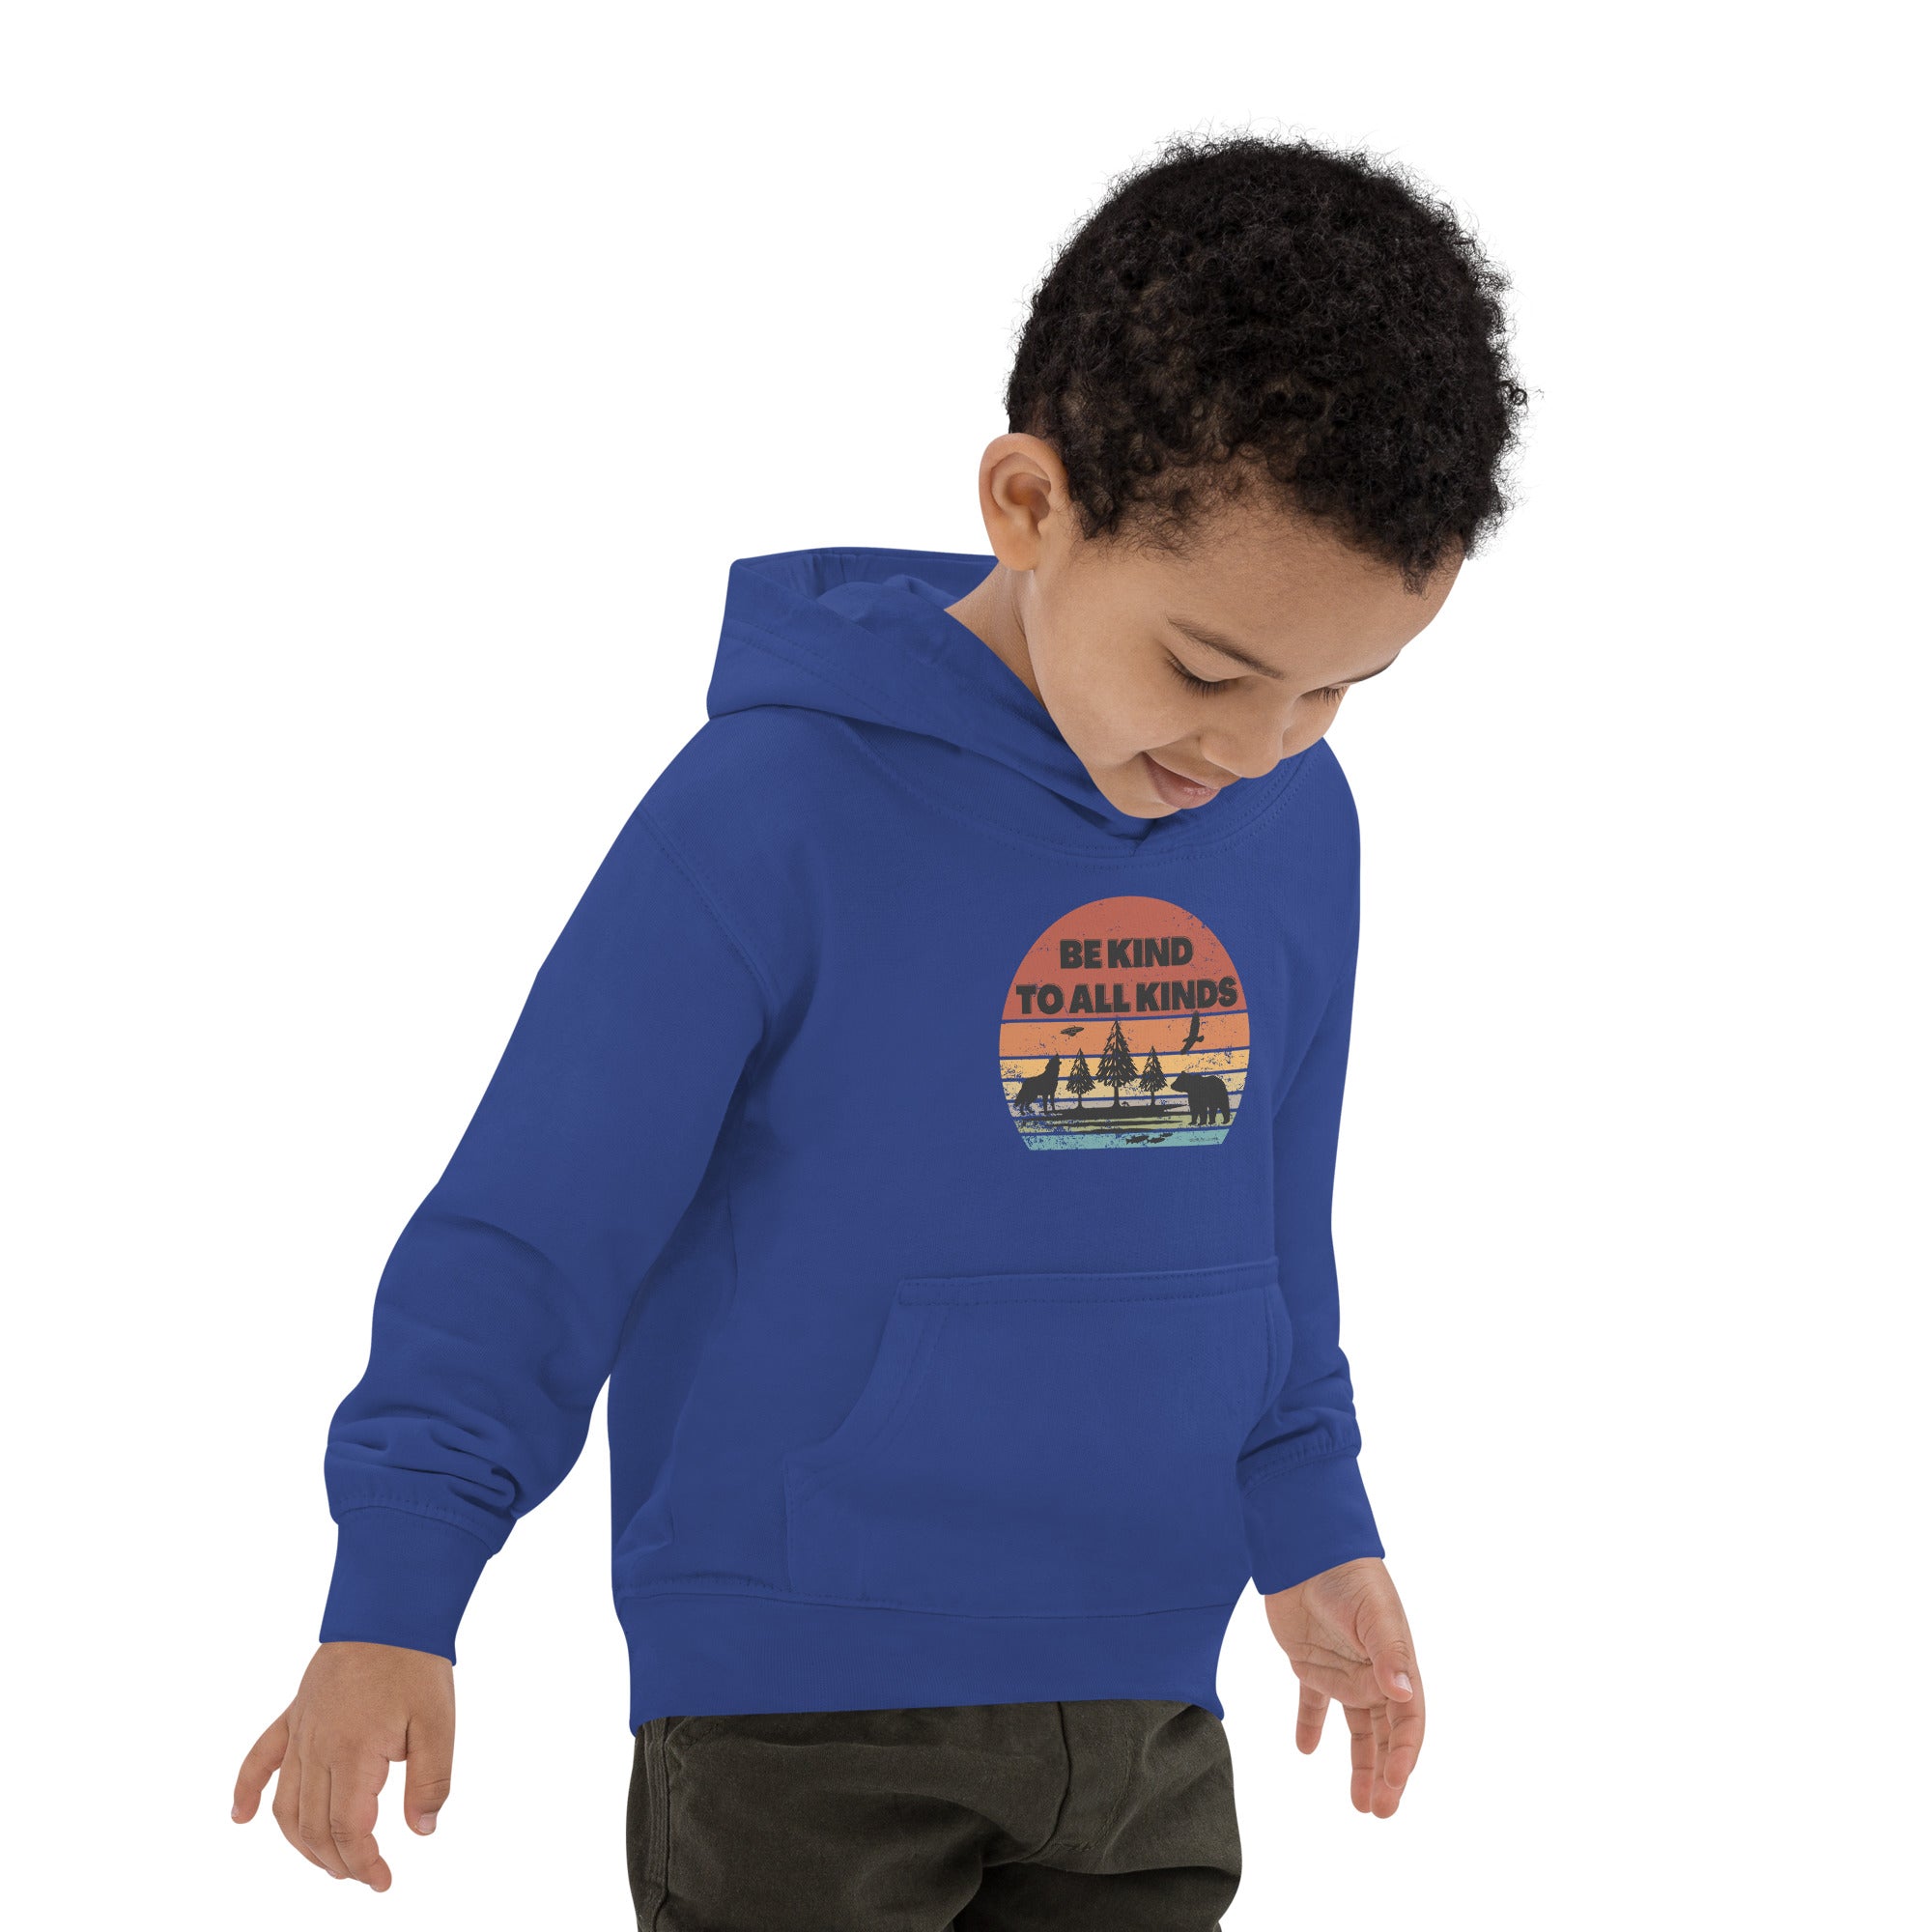 BE KIND TO ALL KINDS Kids Hoodie Sweatshirt (animals, earth, ET UFO) XS-XL (4 colors)